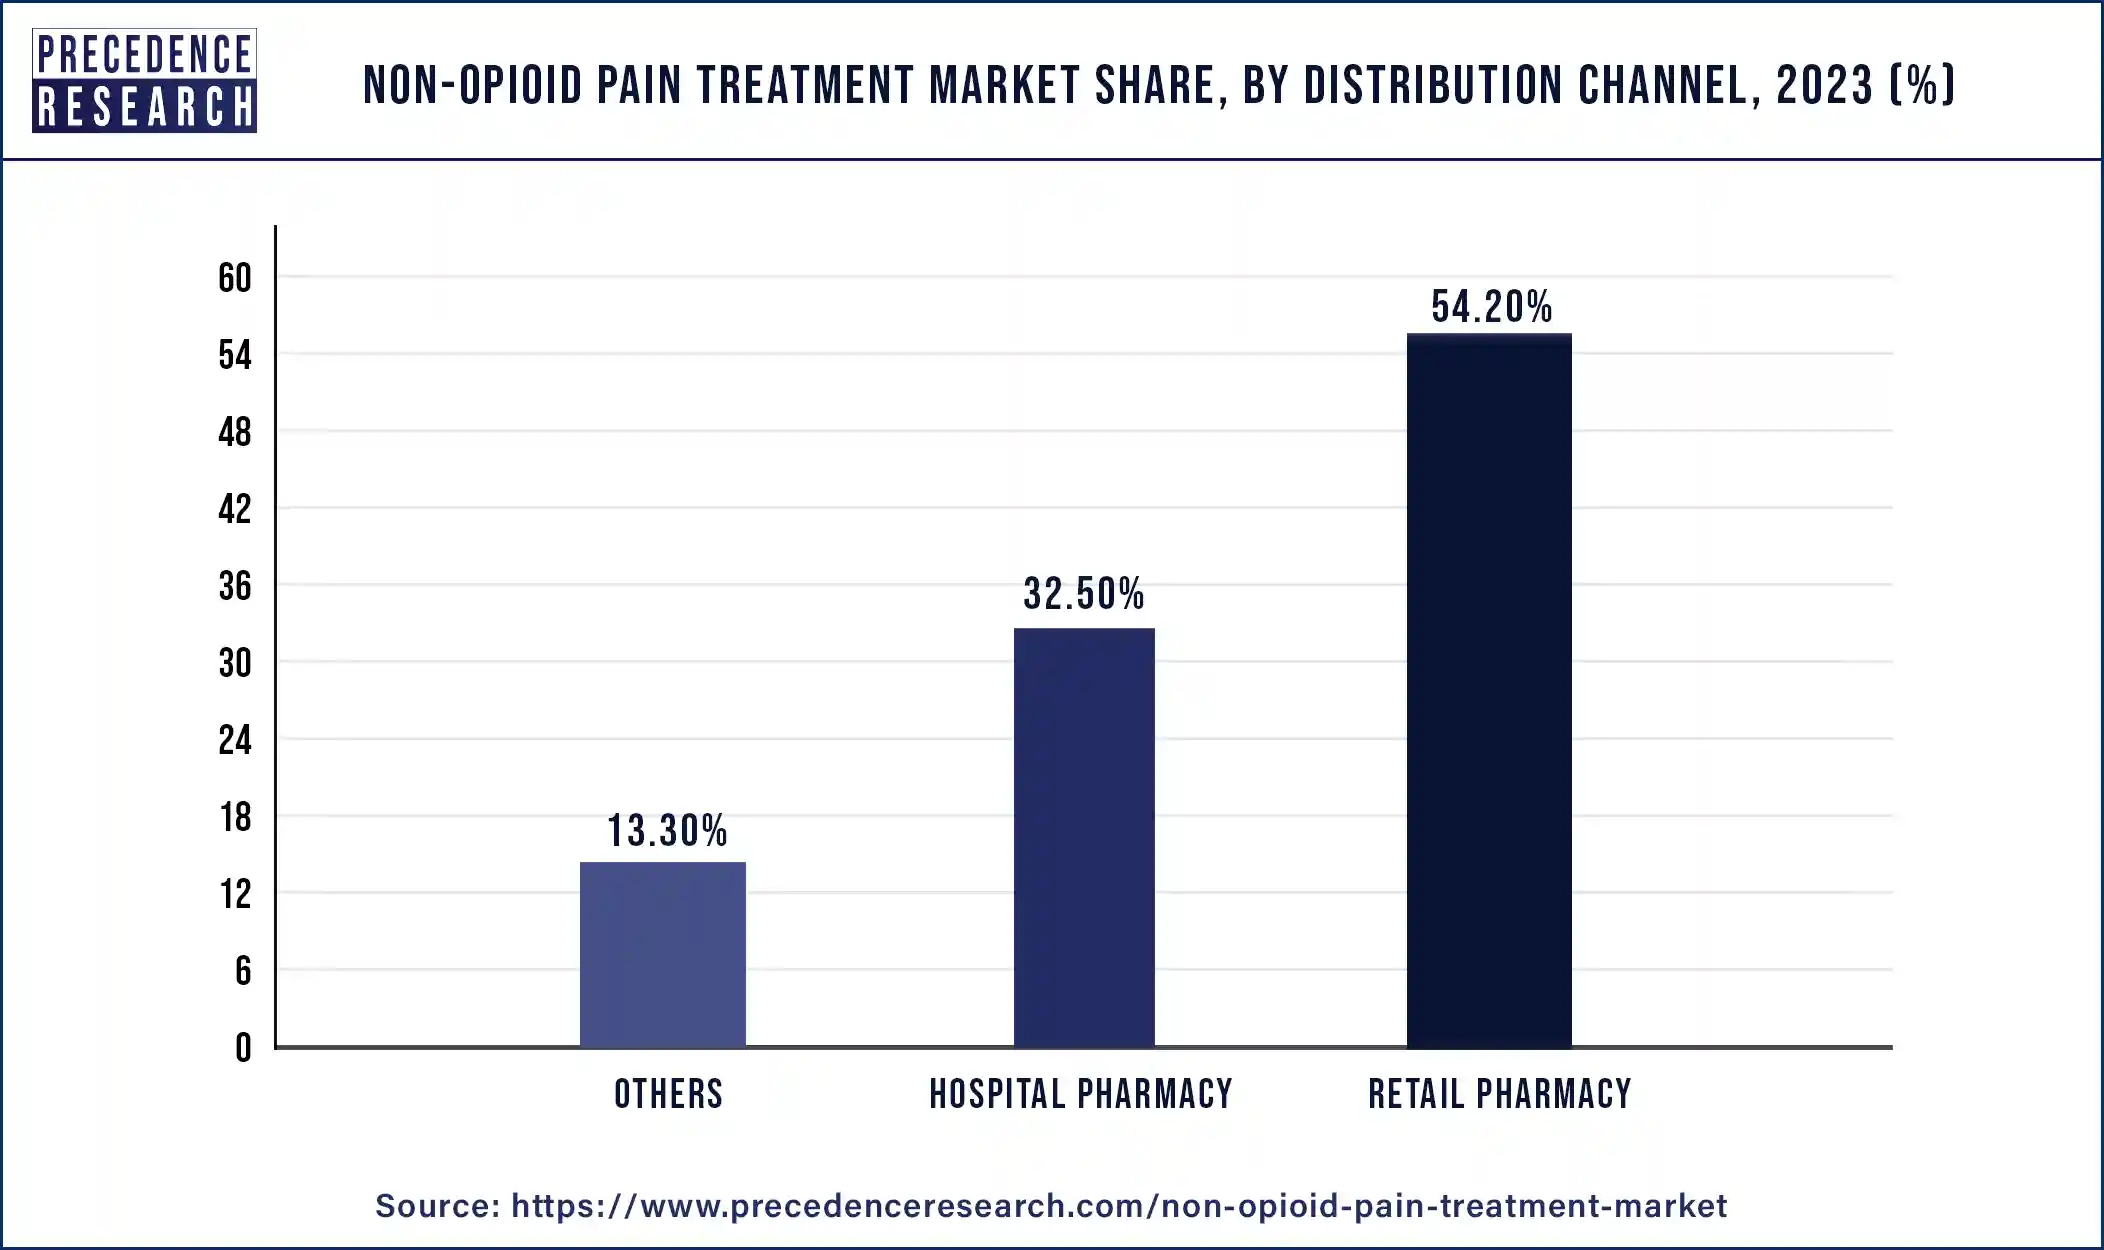 Non-opioid Pain Treatment Market Share, By Distribution Channel, 2023 (%)